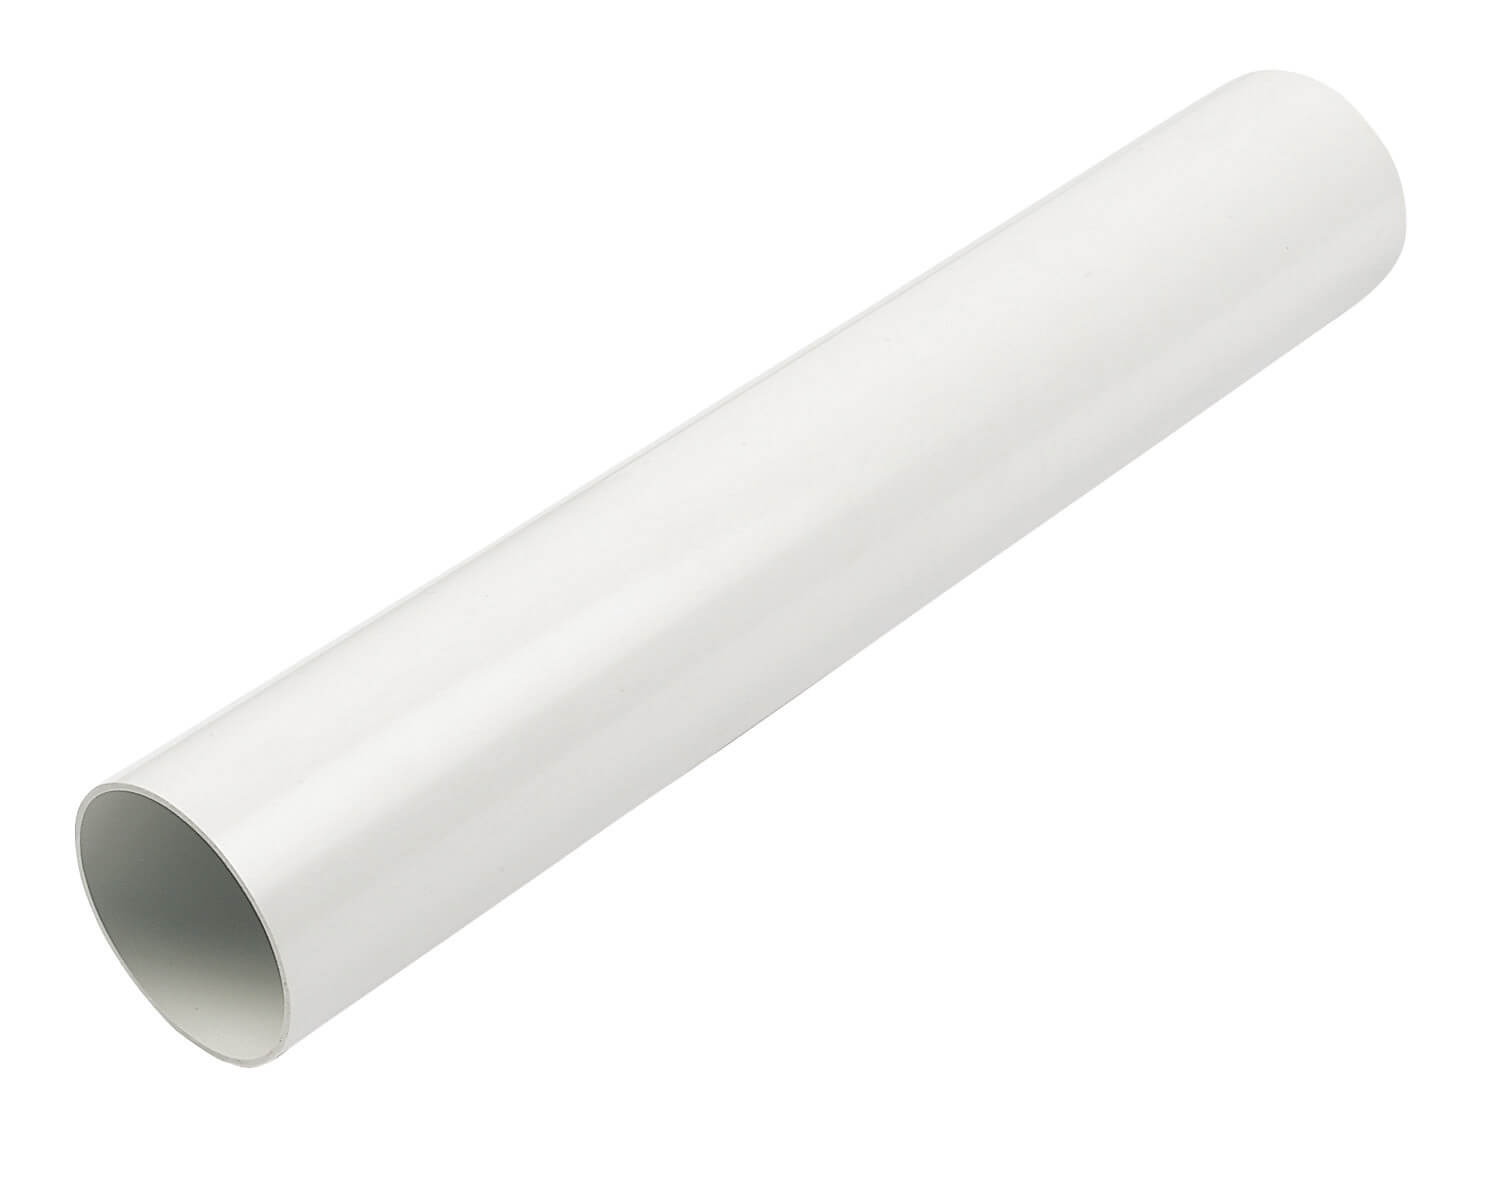 White 68mm x 4m Roundstyle Gutter Downpipe